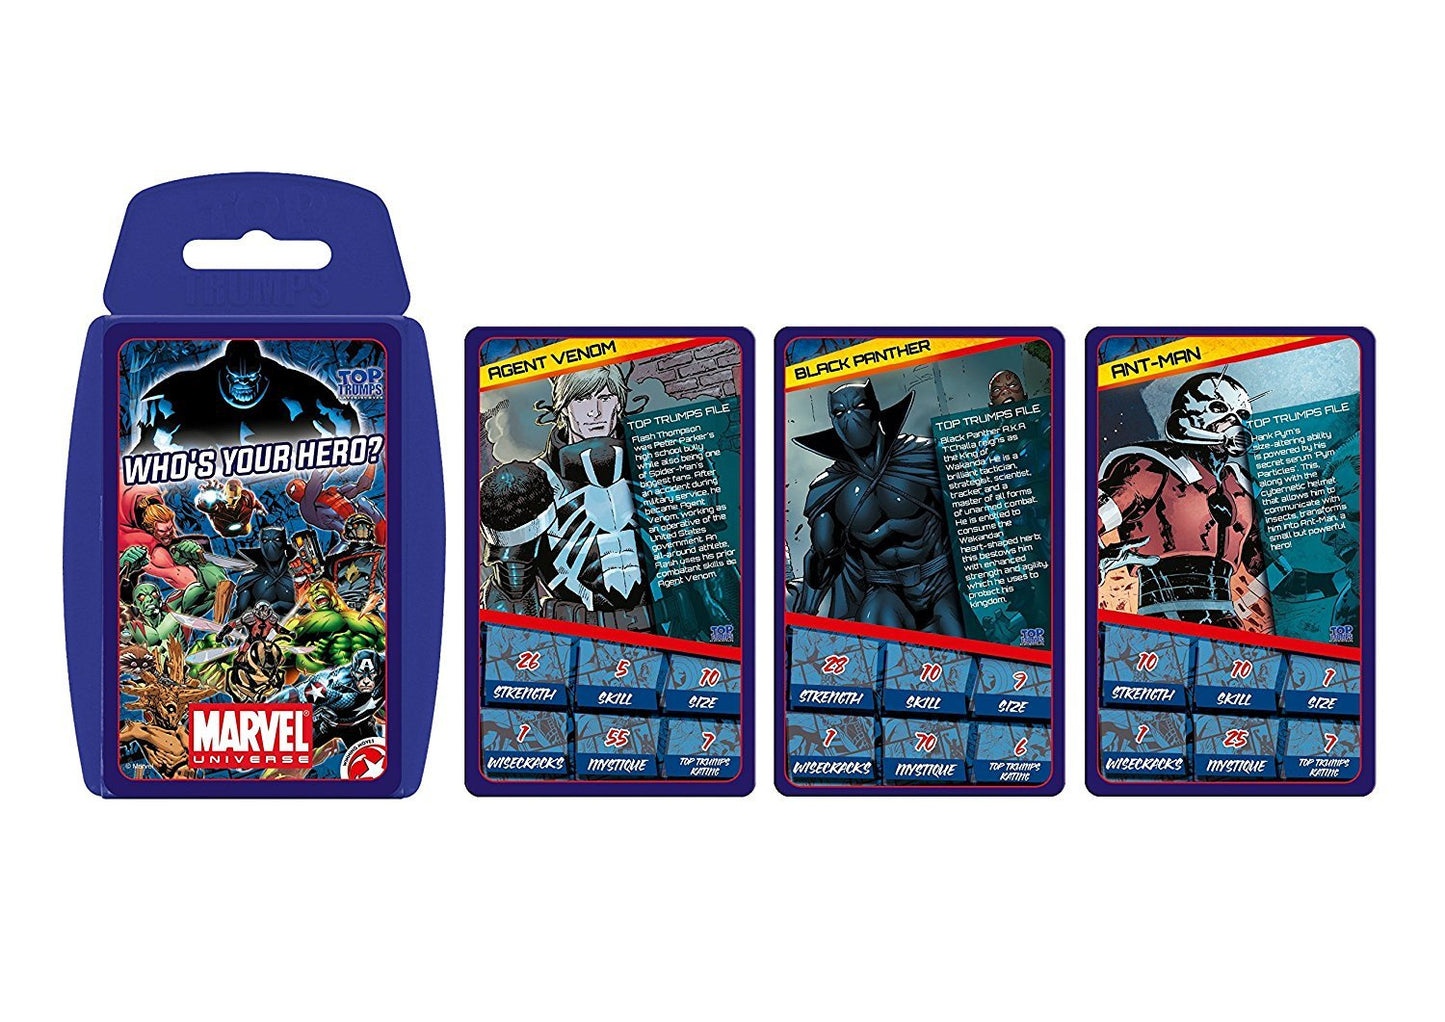 TOP TRUMPS - Marvel Universe Who is Your Hero?